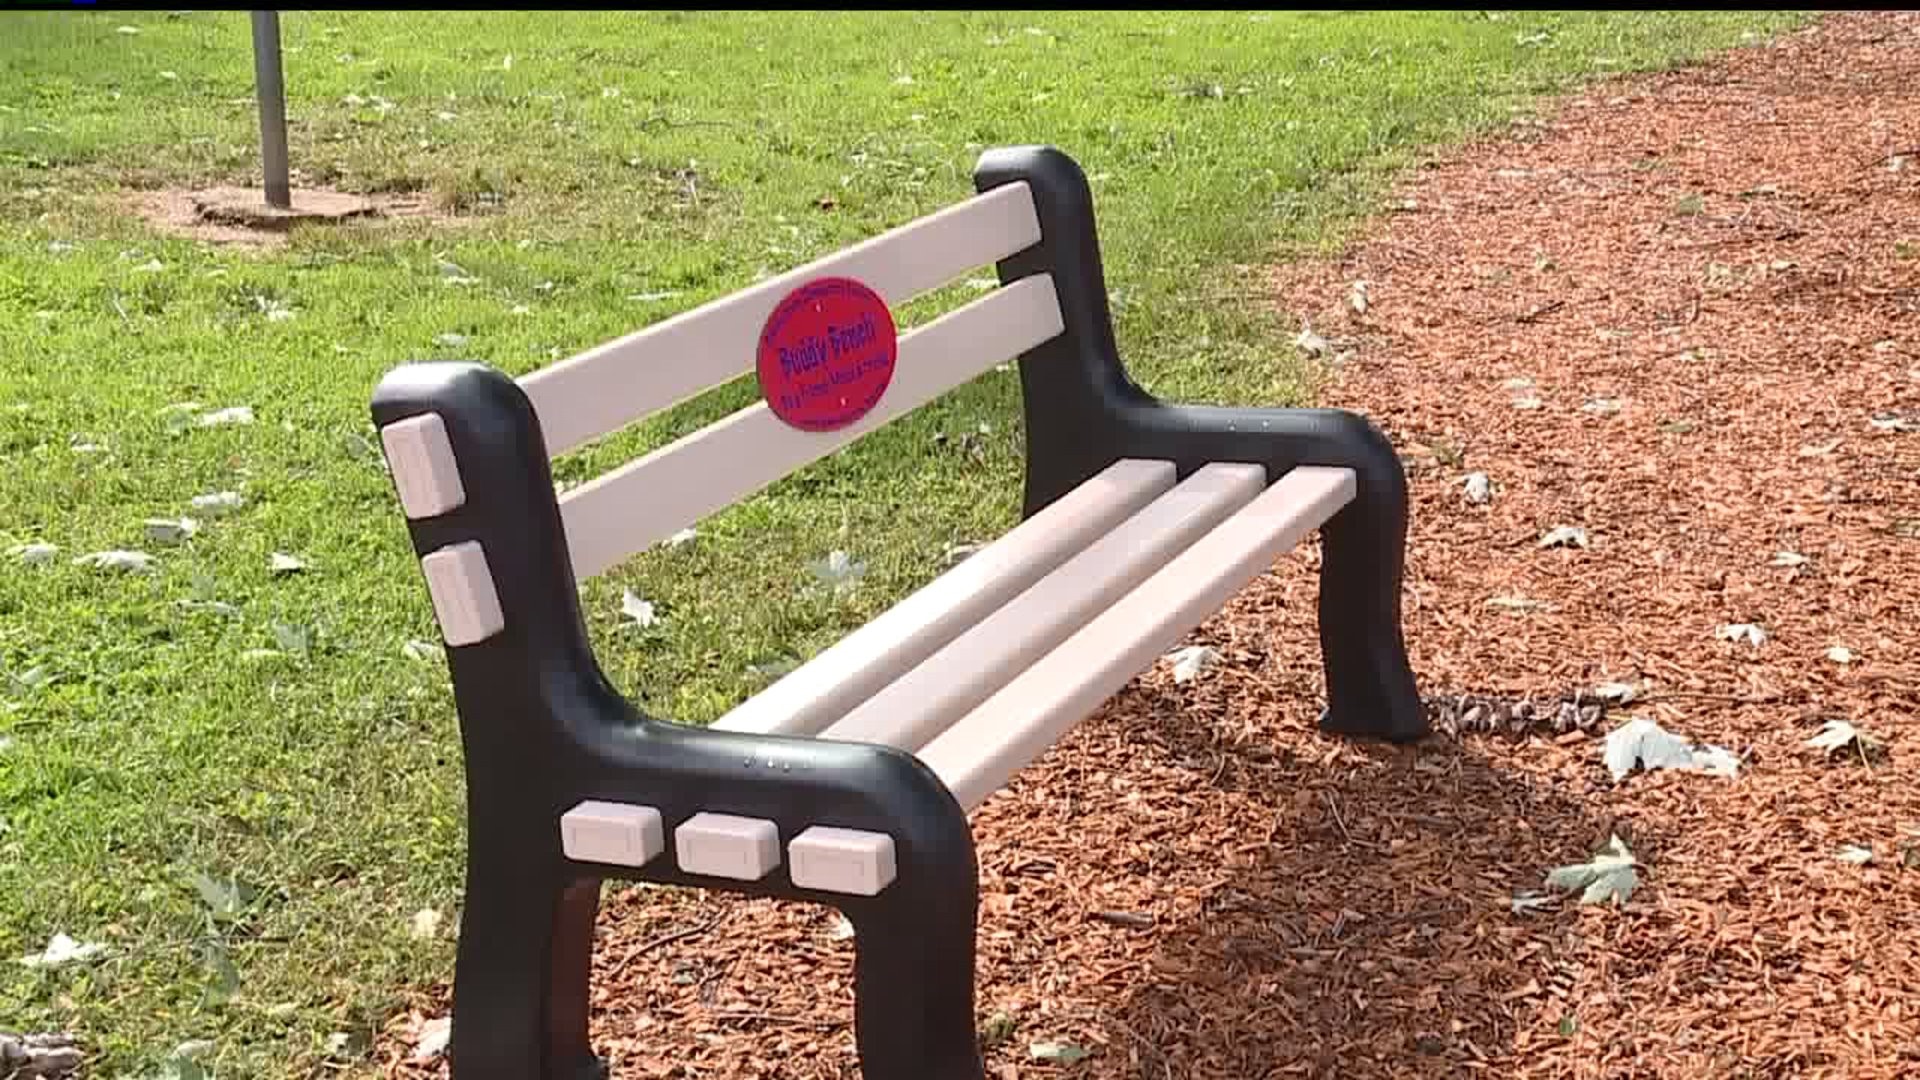 Buddy bench installed at local elementary school